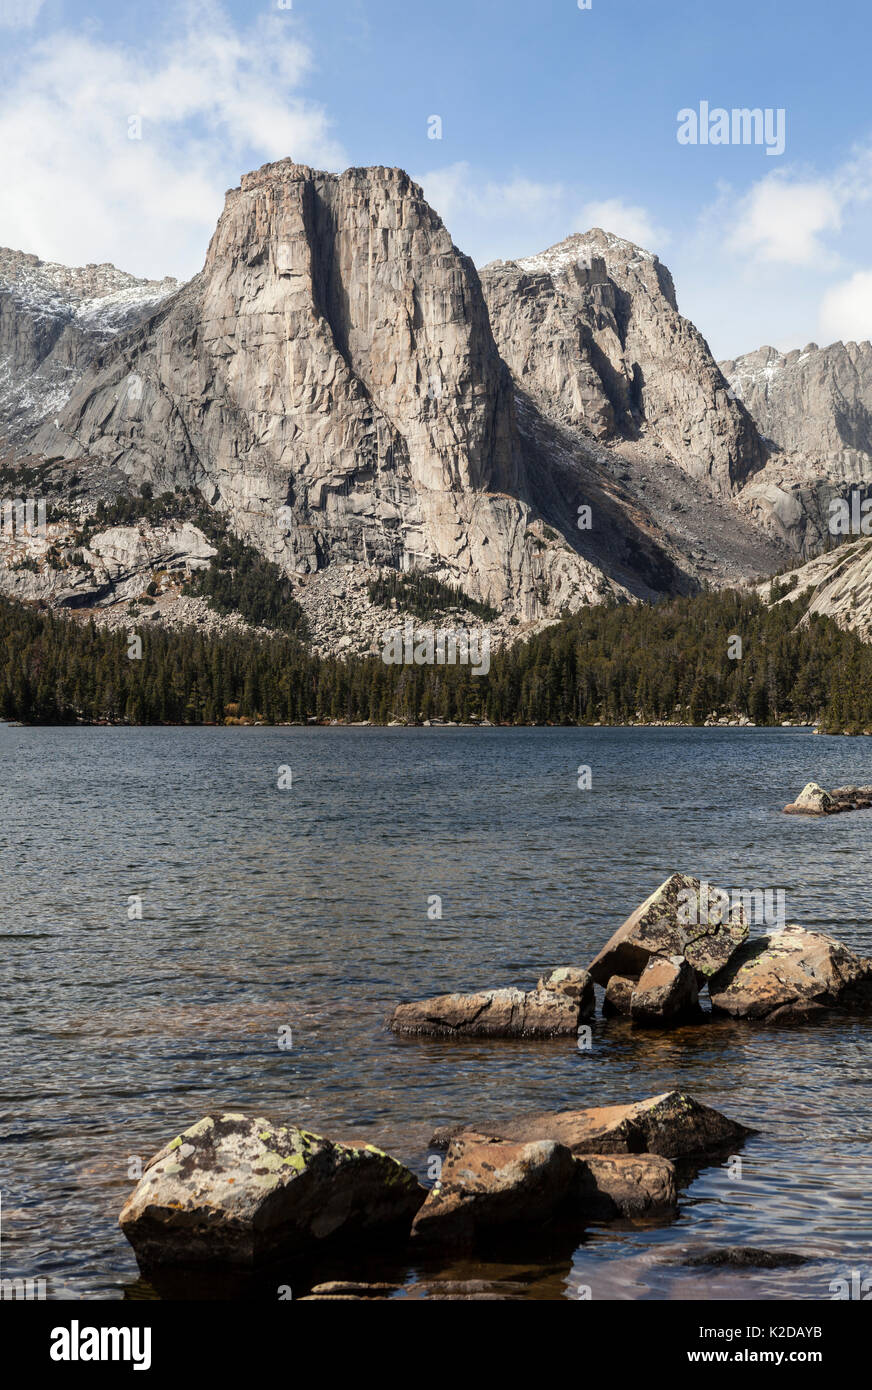 Cathedral Peak from Middle Lake, Popo Agie Wilderness, Wind River Range, Shoshone National Forest, Wyoming, USA. September 2015. Stock Photo